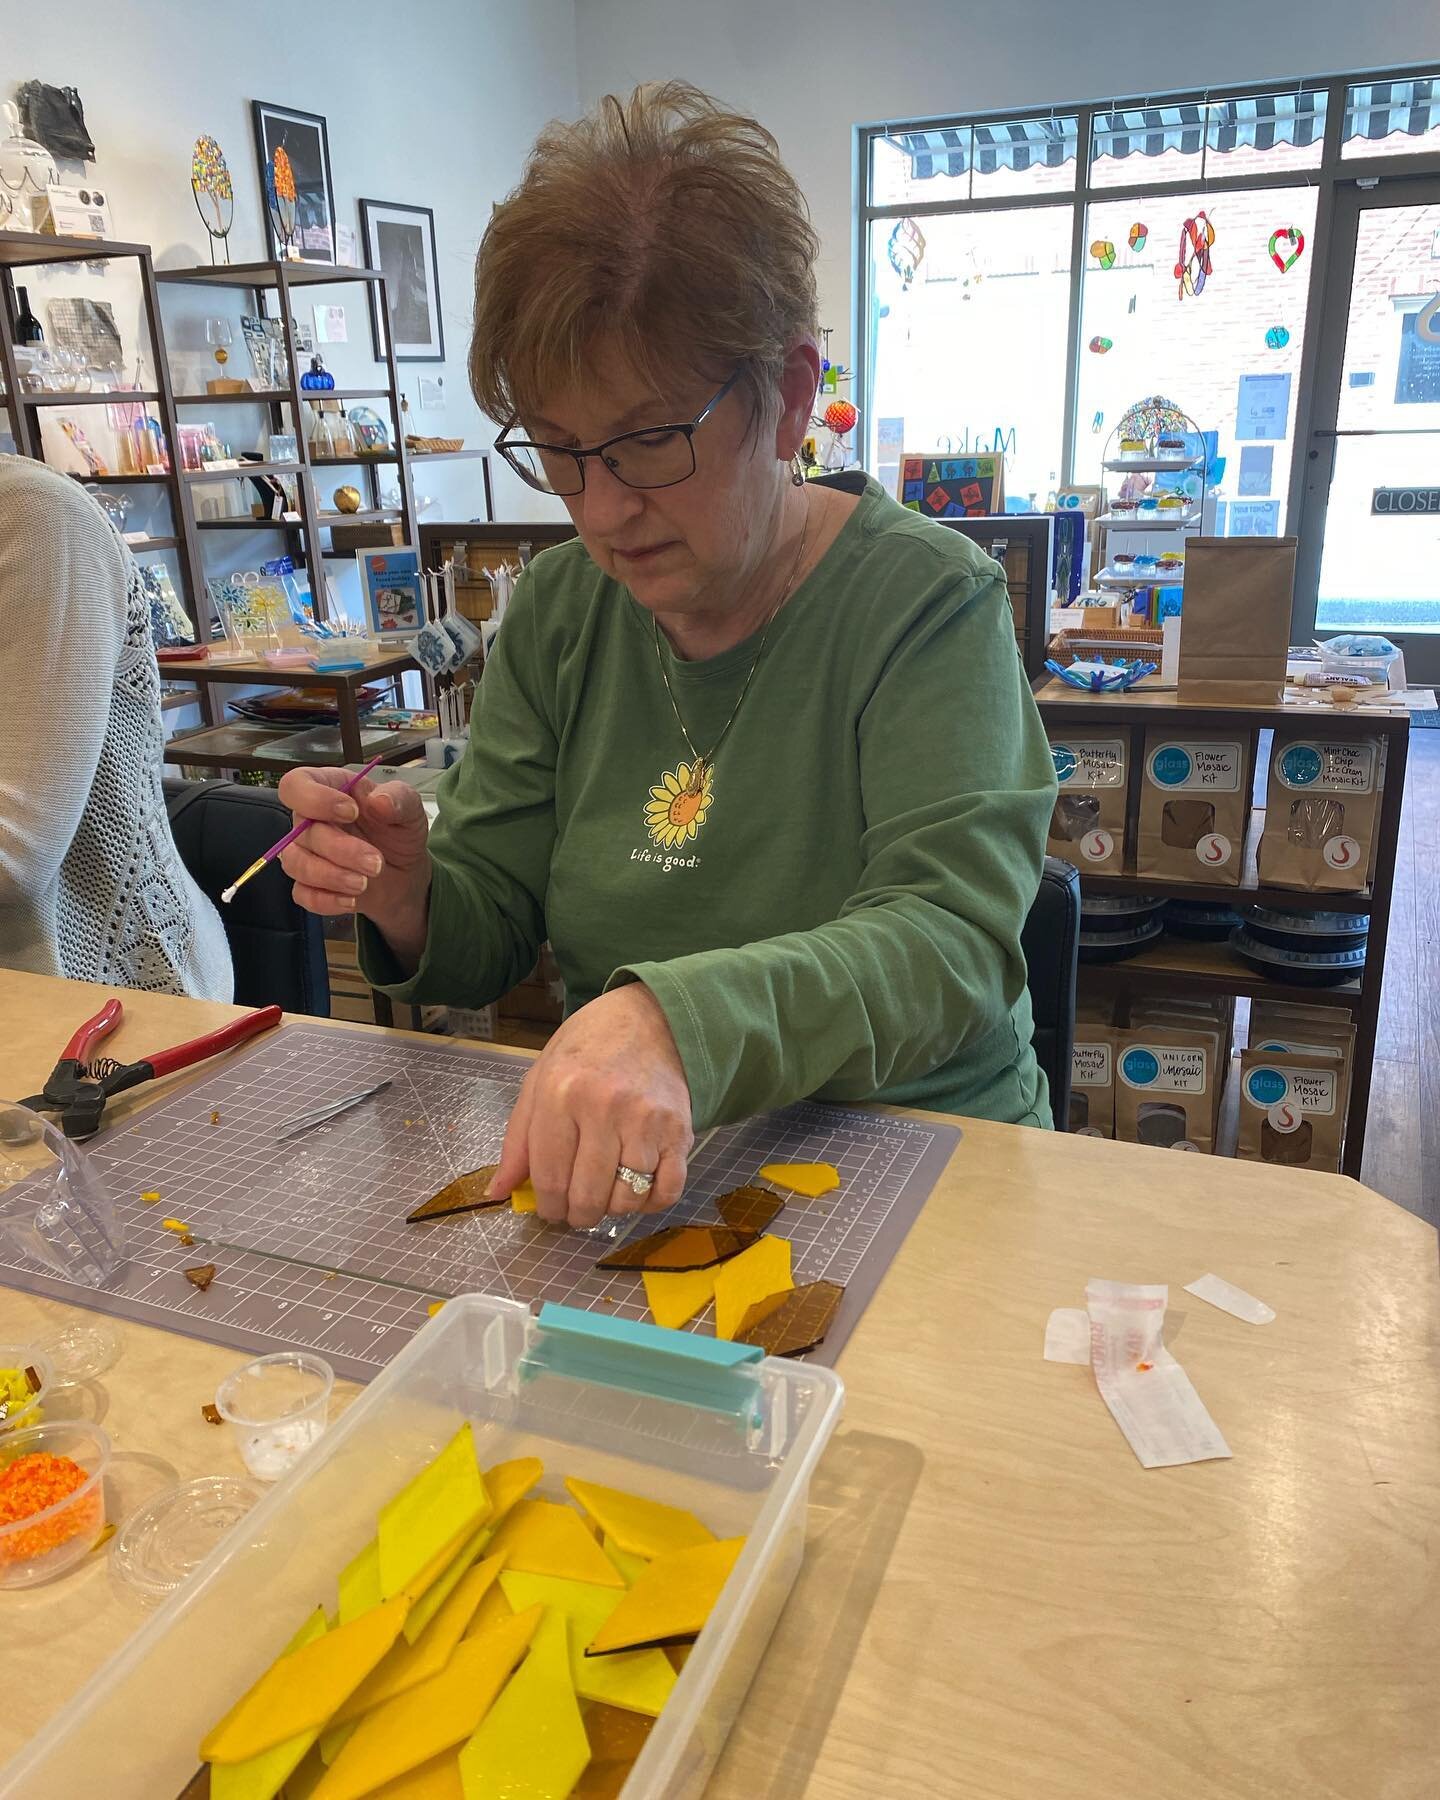 Sunflowers Galore! We&rsquo;re loving the sunflowers for Ukraine and our spring workshops!! &hellip;.#butlercountytourism #butlercountyexploremore #gozelie #zelienople #zelienoplepa #sunflower #sunflowersforukraine #glass #diy #diyclass #fusedglass #